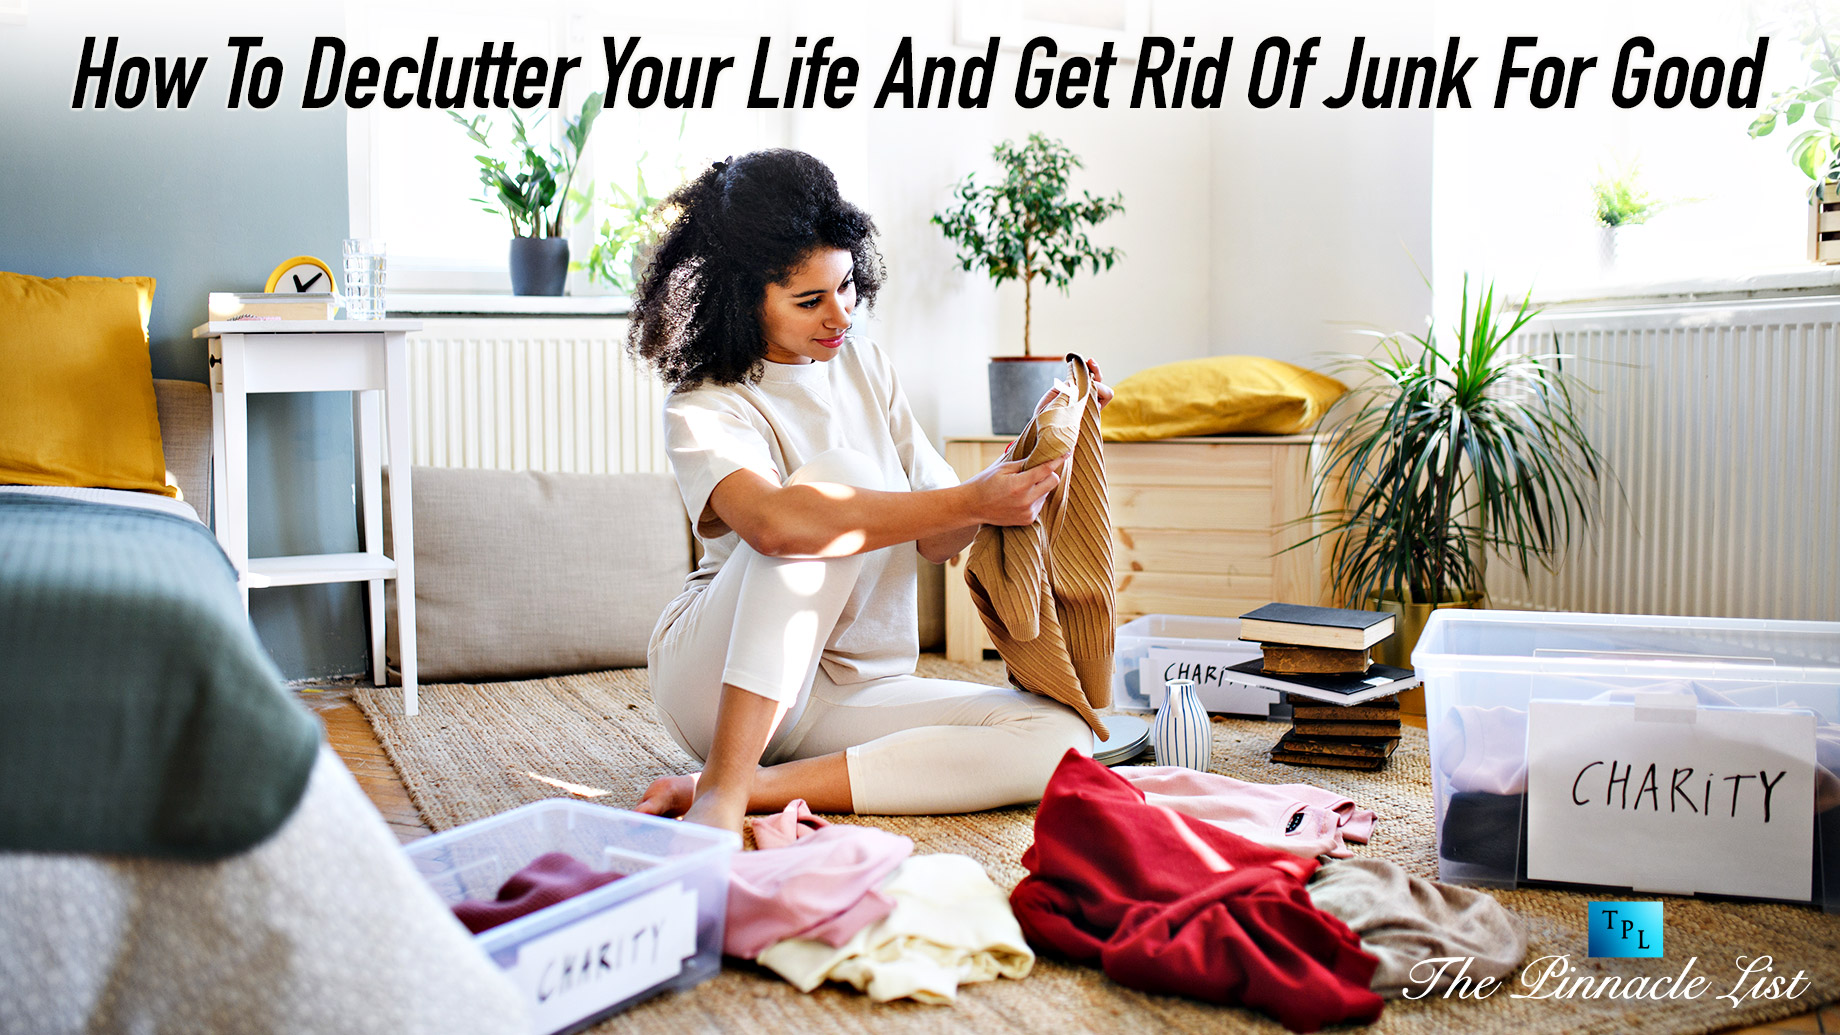 How To Declutter Your Life And Get Rid Of Junk For Good